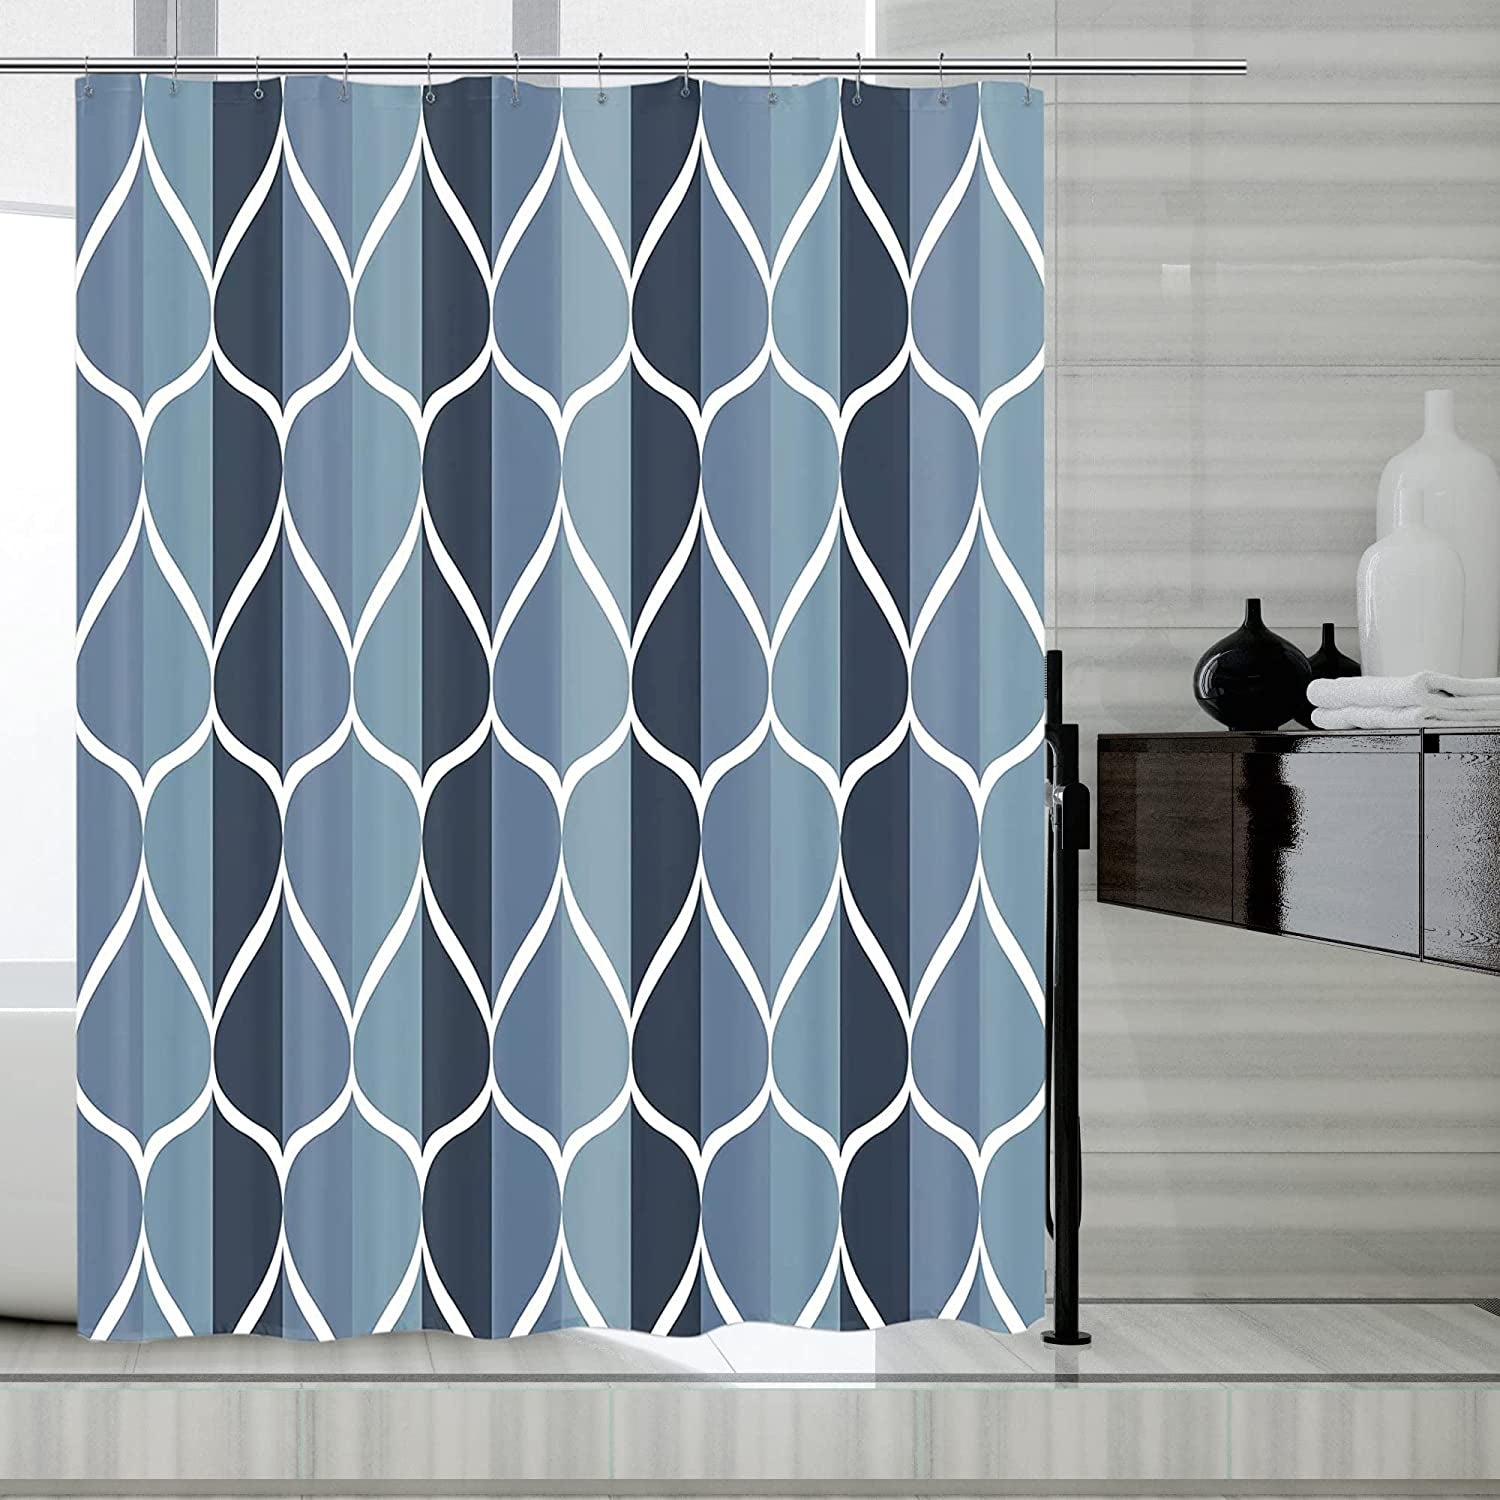 Blue Grid Fabric Shower Curtain Liner with Magnets, Waterproof Hotel Quality, 72 X 72 Machine Washable